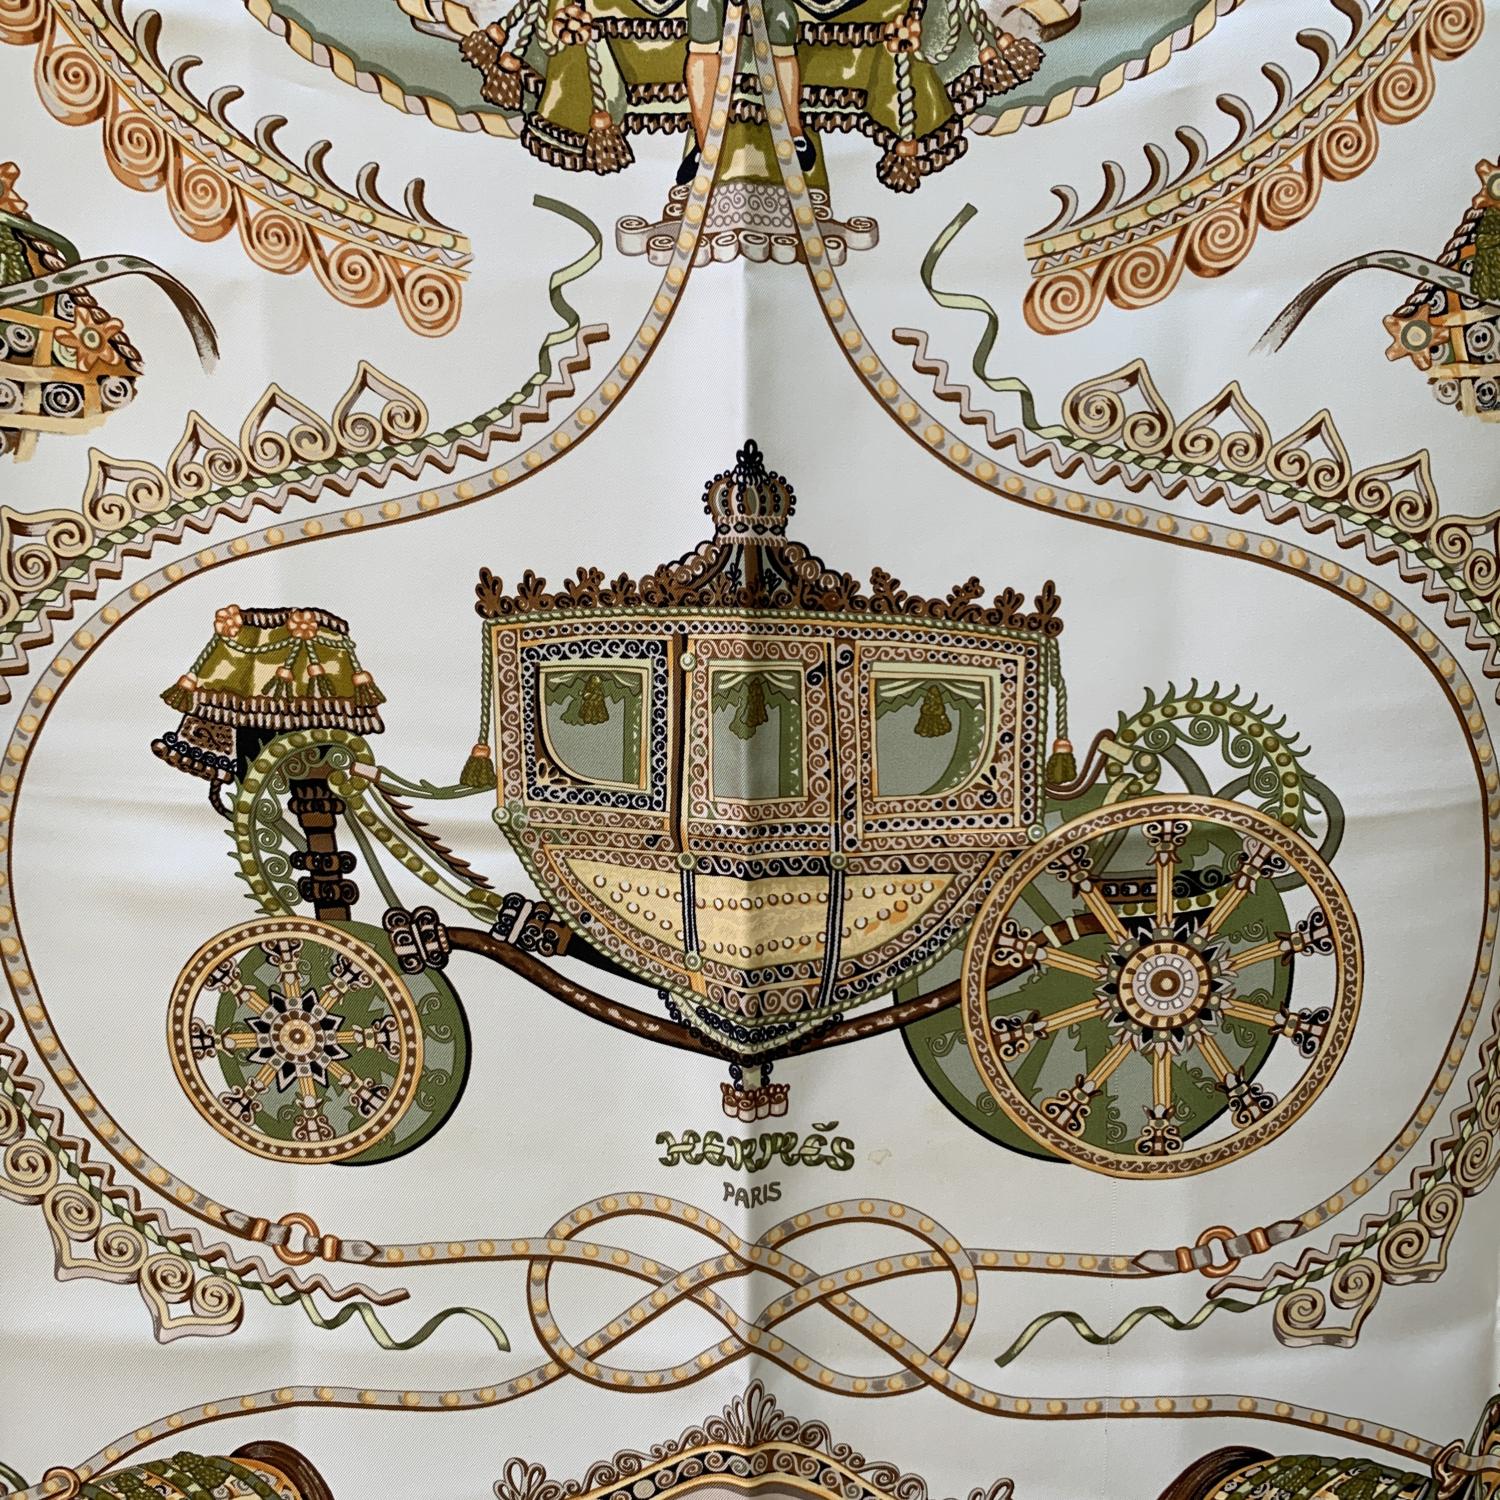 HERMES ' Paperoles' silk scarf. Designed by Claudia Stuhlhofer-Mayr and first issued in 2000. Miltary green borders. It depicts a ceremonial carriage surrounded by horses. Hand rolled edges. Made in France. Composition: 100% silk. Composition tag is